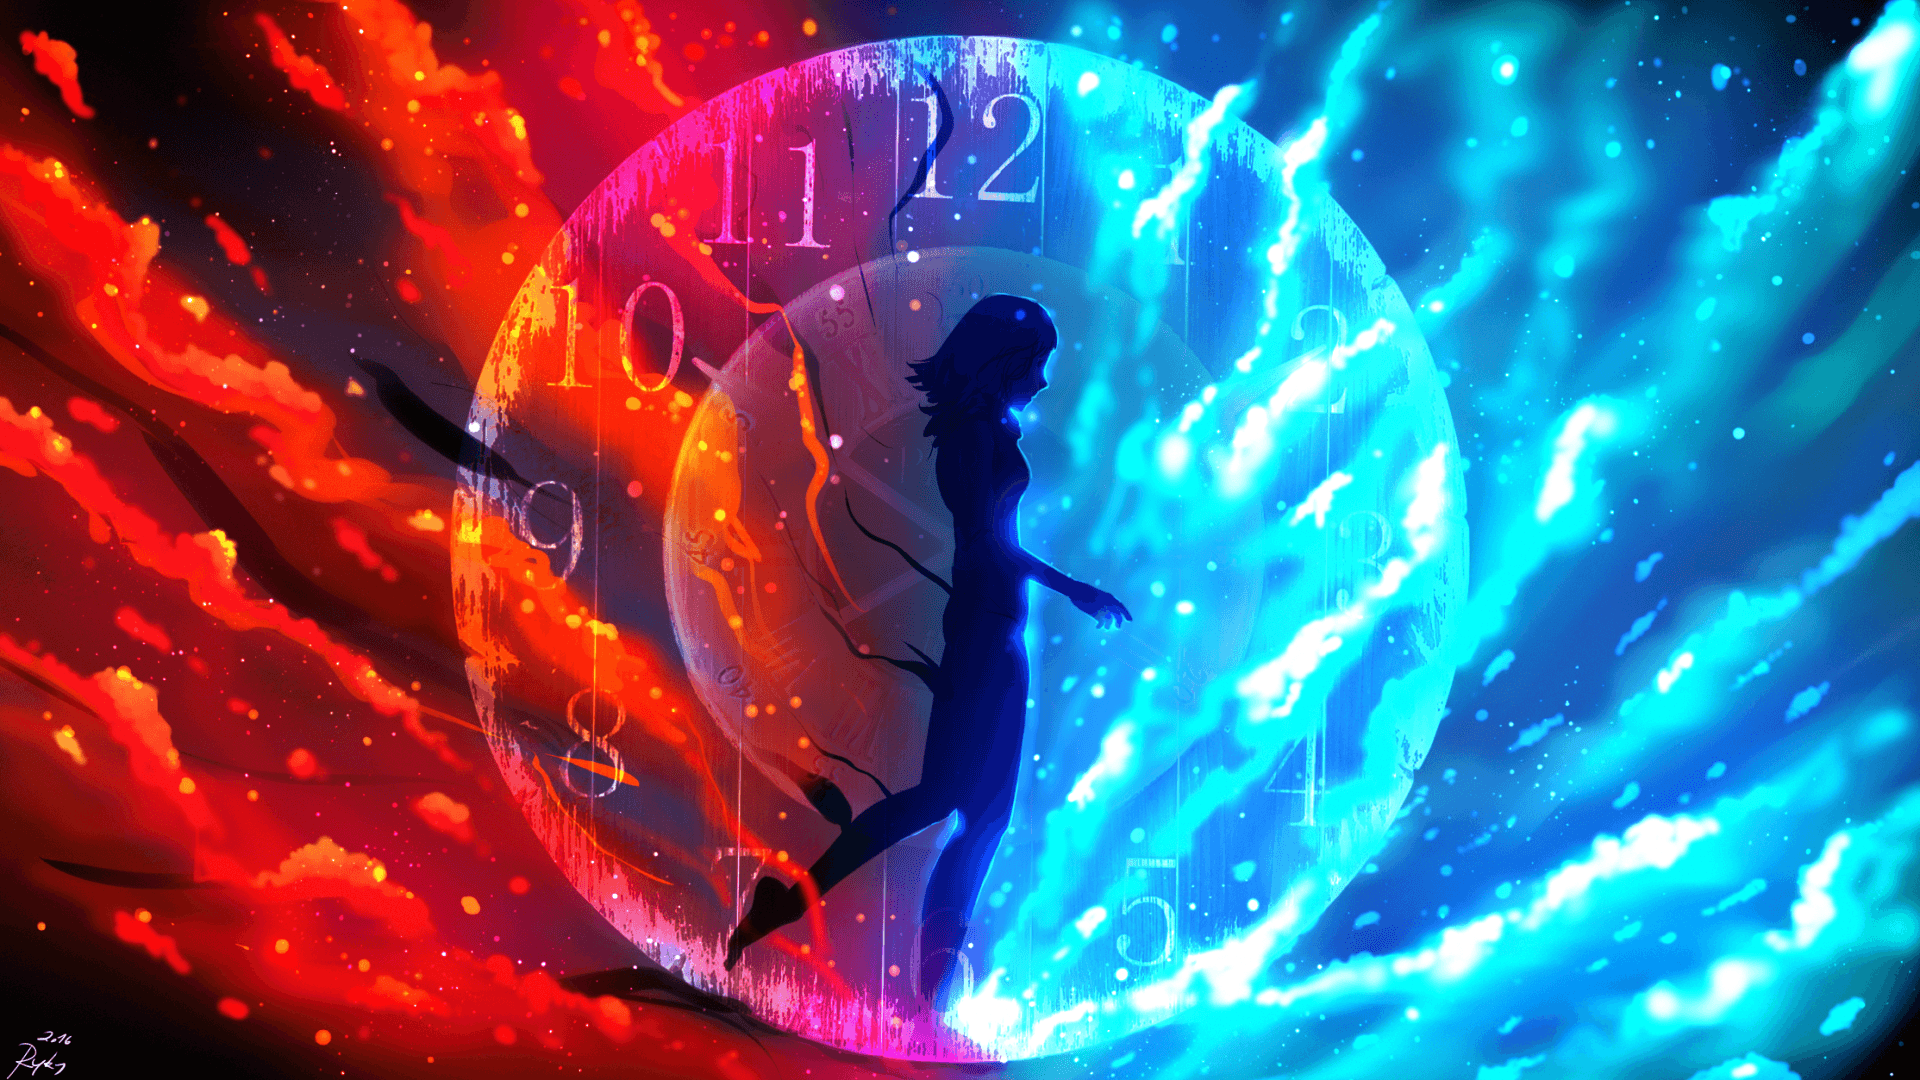 Download 1920x1080 As The Time Passes By, Anime Girl, Clock, Fire